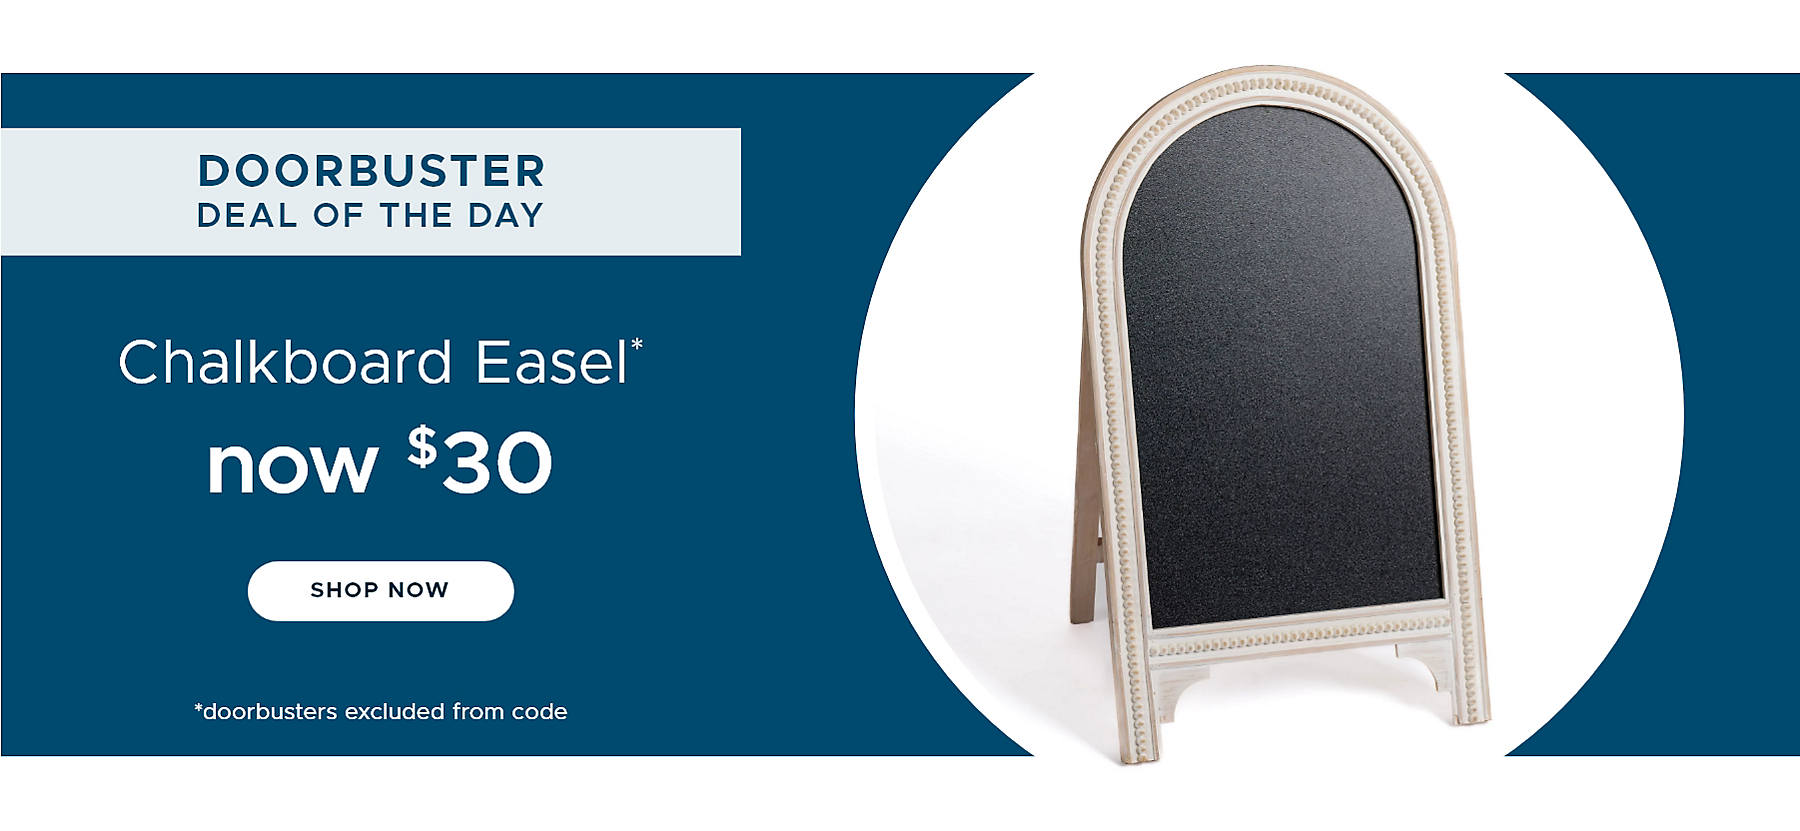 Doorbuster Deal of the Day Chalkboard Easel* now $30 shop now *doorbusters excluded from code